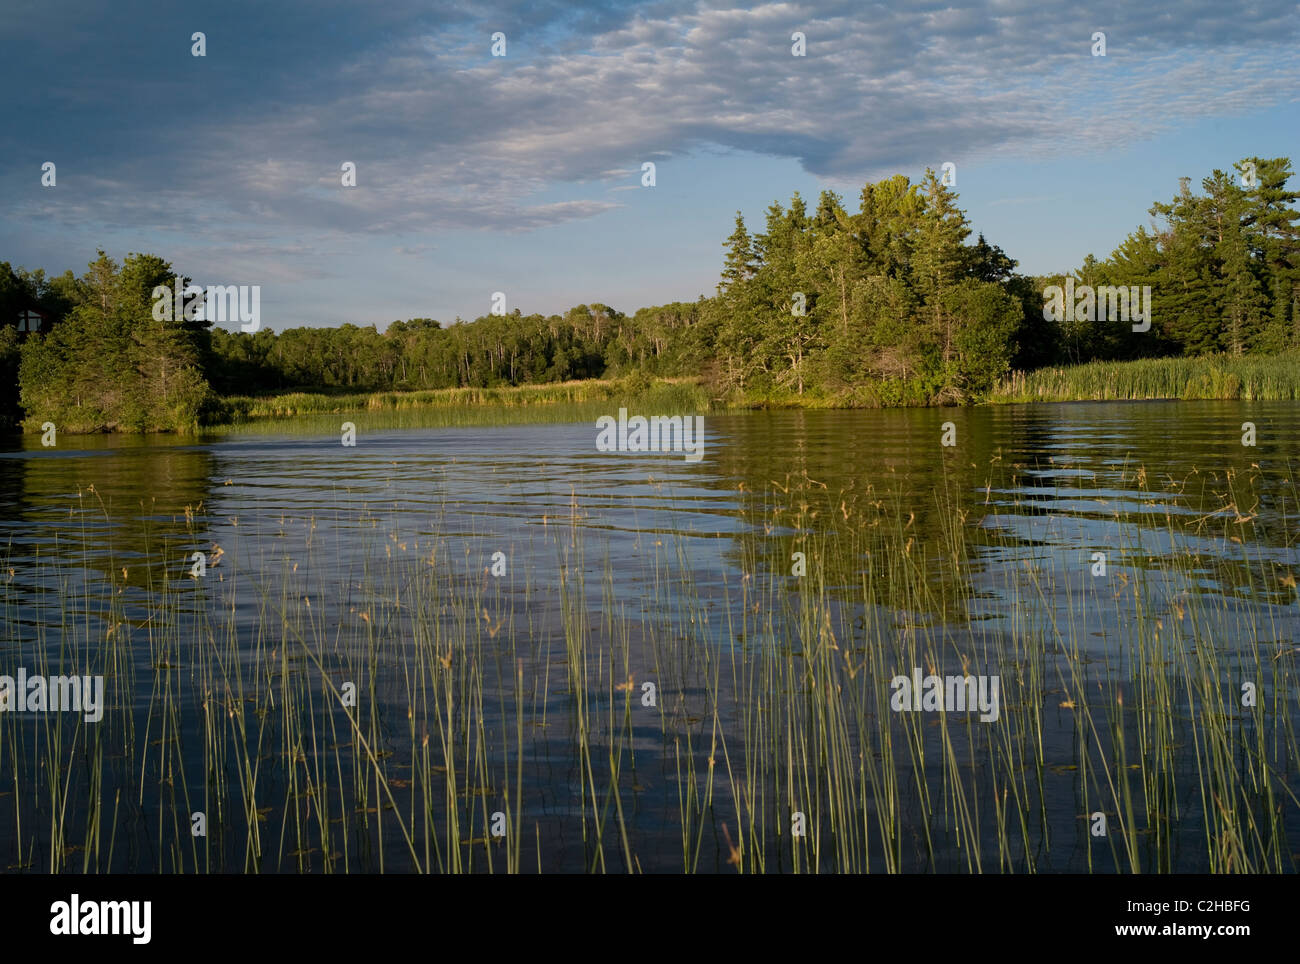 Lake Of The Woods, Ontario, Canada; Forest Surrounding The Lake Edge Stock Photo